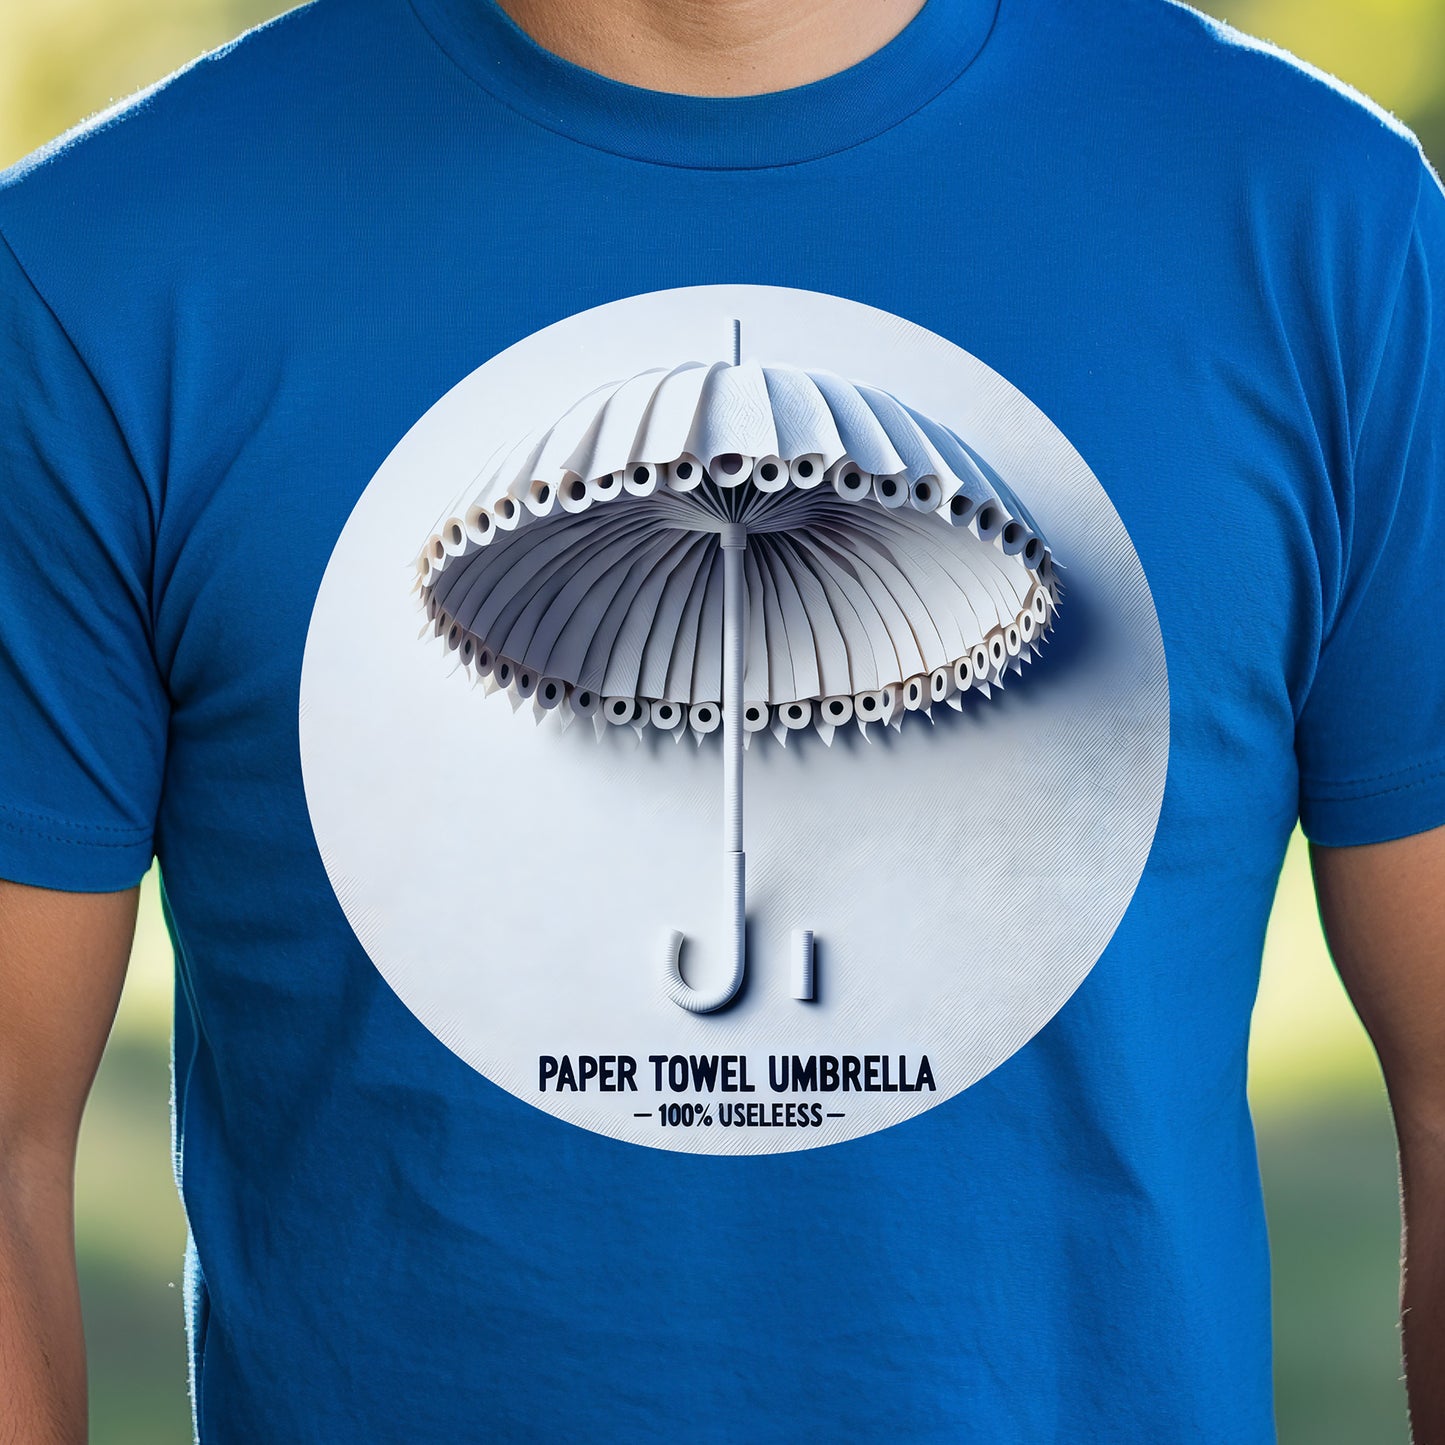 Paper Towel Umbrella T-Shirt: 100% Useless - Failed Inventions - A Humorous Statement Piece for Those Who Love Funny Fashion Choices